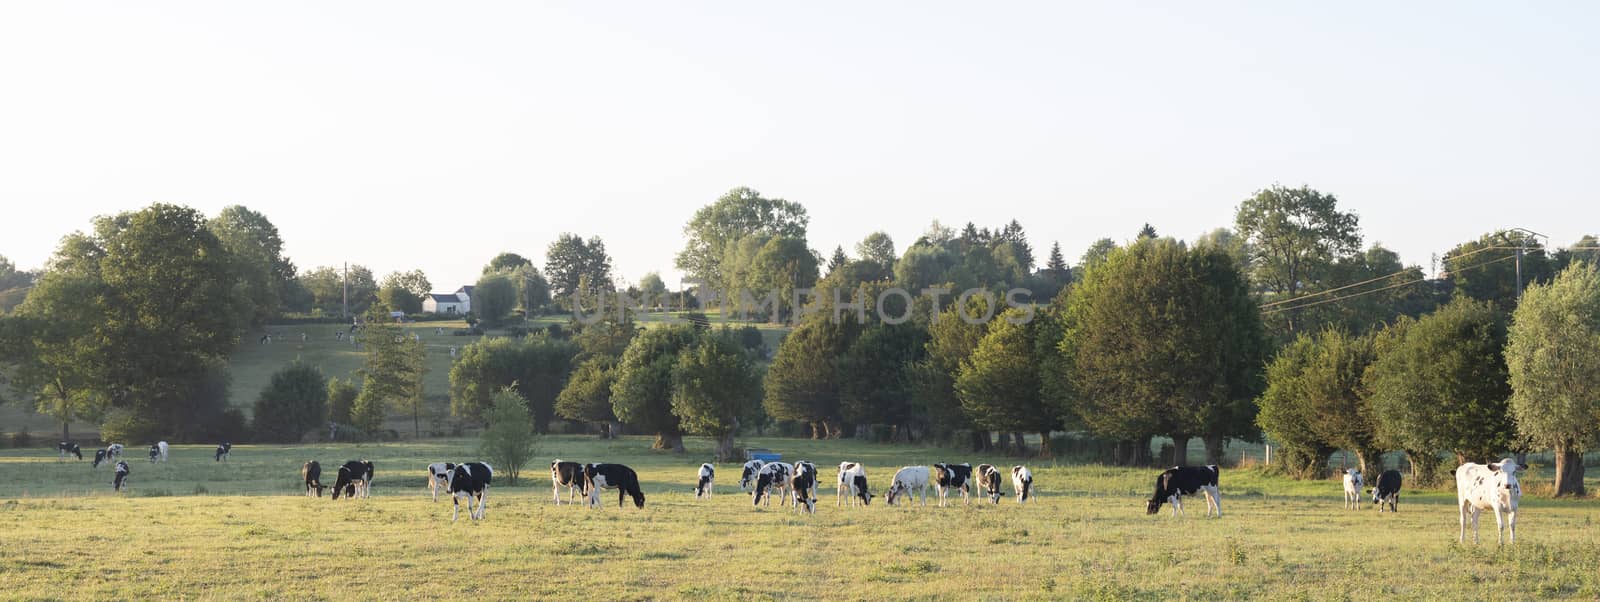 cows in the north of france near saint-quentin and valenciennes by ahavelaar